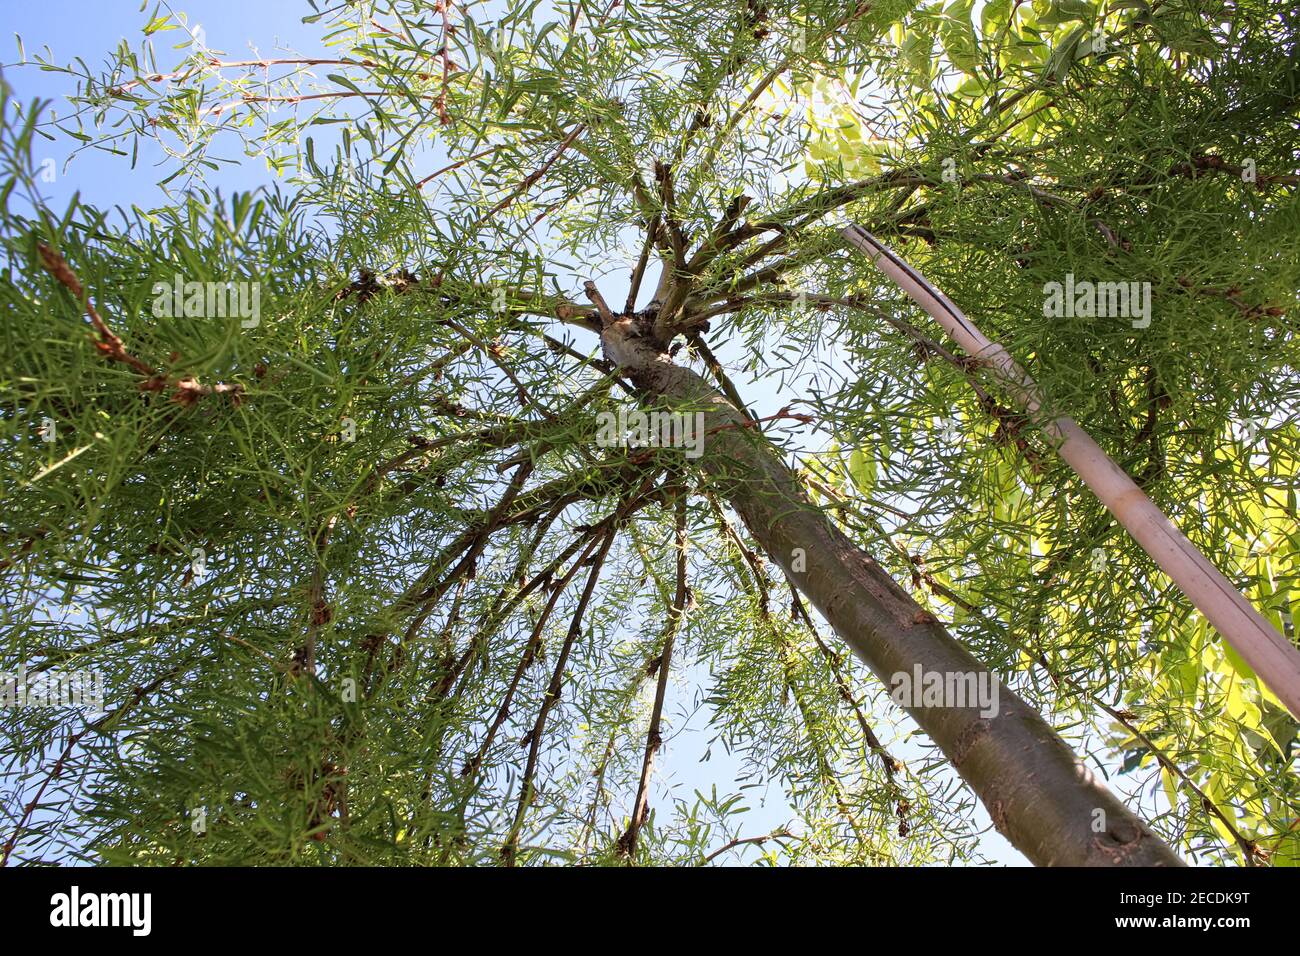 Looking up through the branches of a peashrub caragana Stock Photo